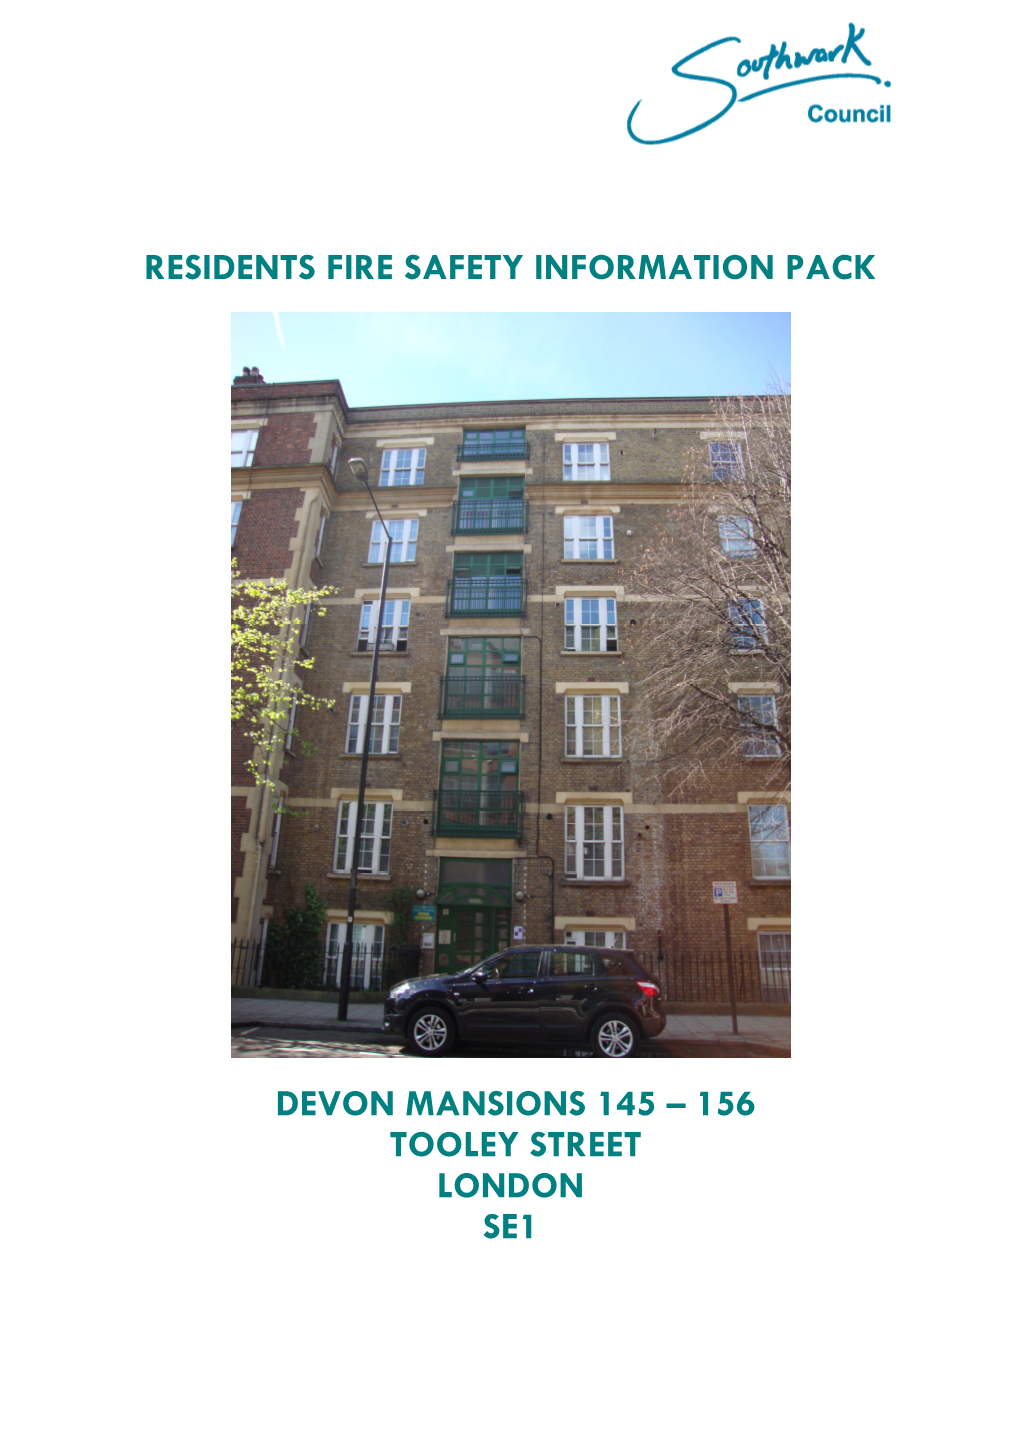 Residents Fire Safety Information Pack Devon Mansions 145 – 156 Tooley